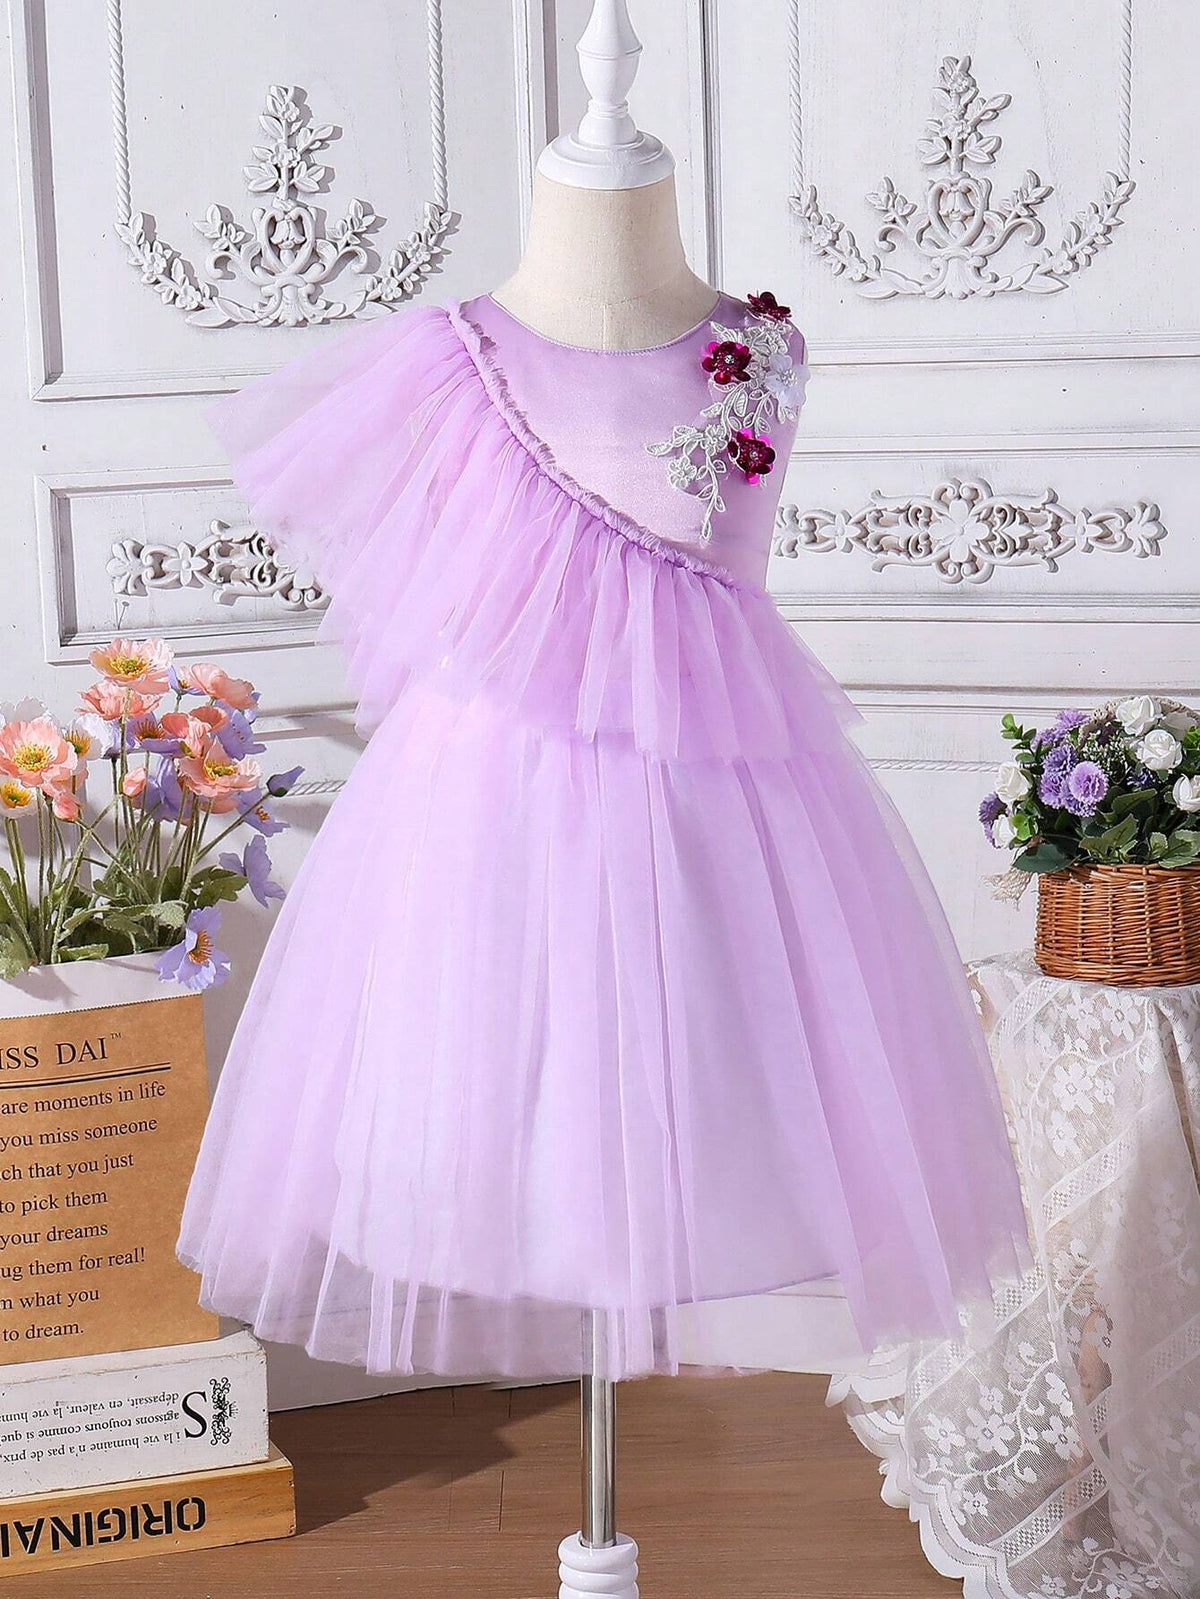 Young Girl Summer Elegant Dress With 3D Floral Decor, Mesh Paneling And Ruffle Hem On The Neckline